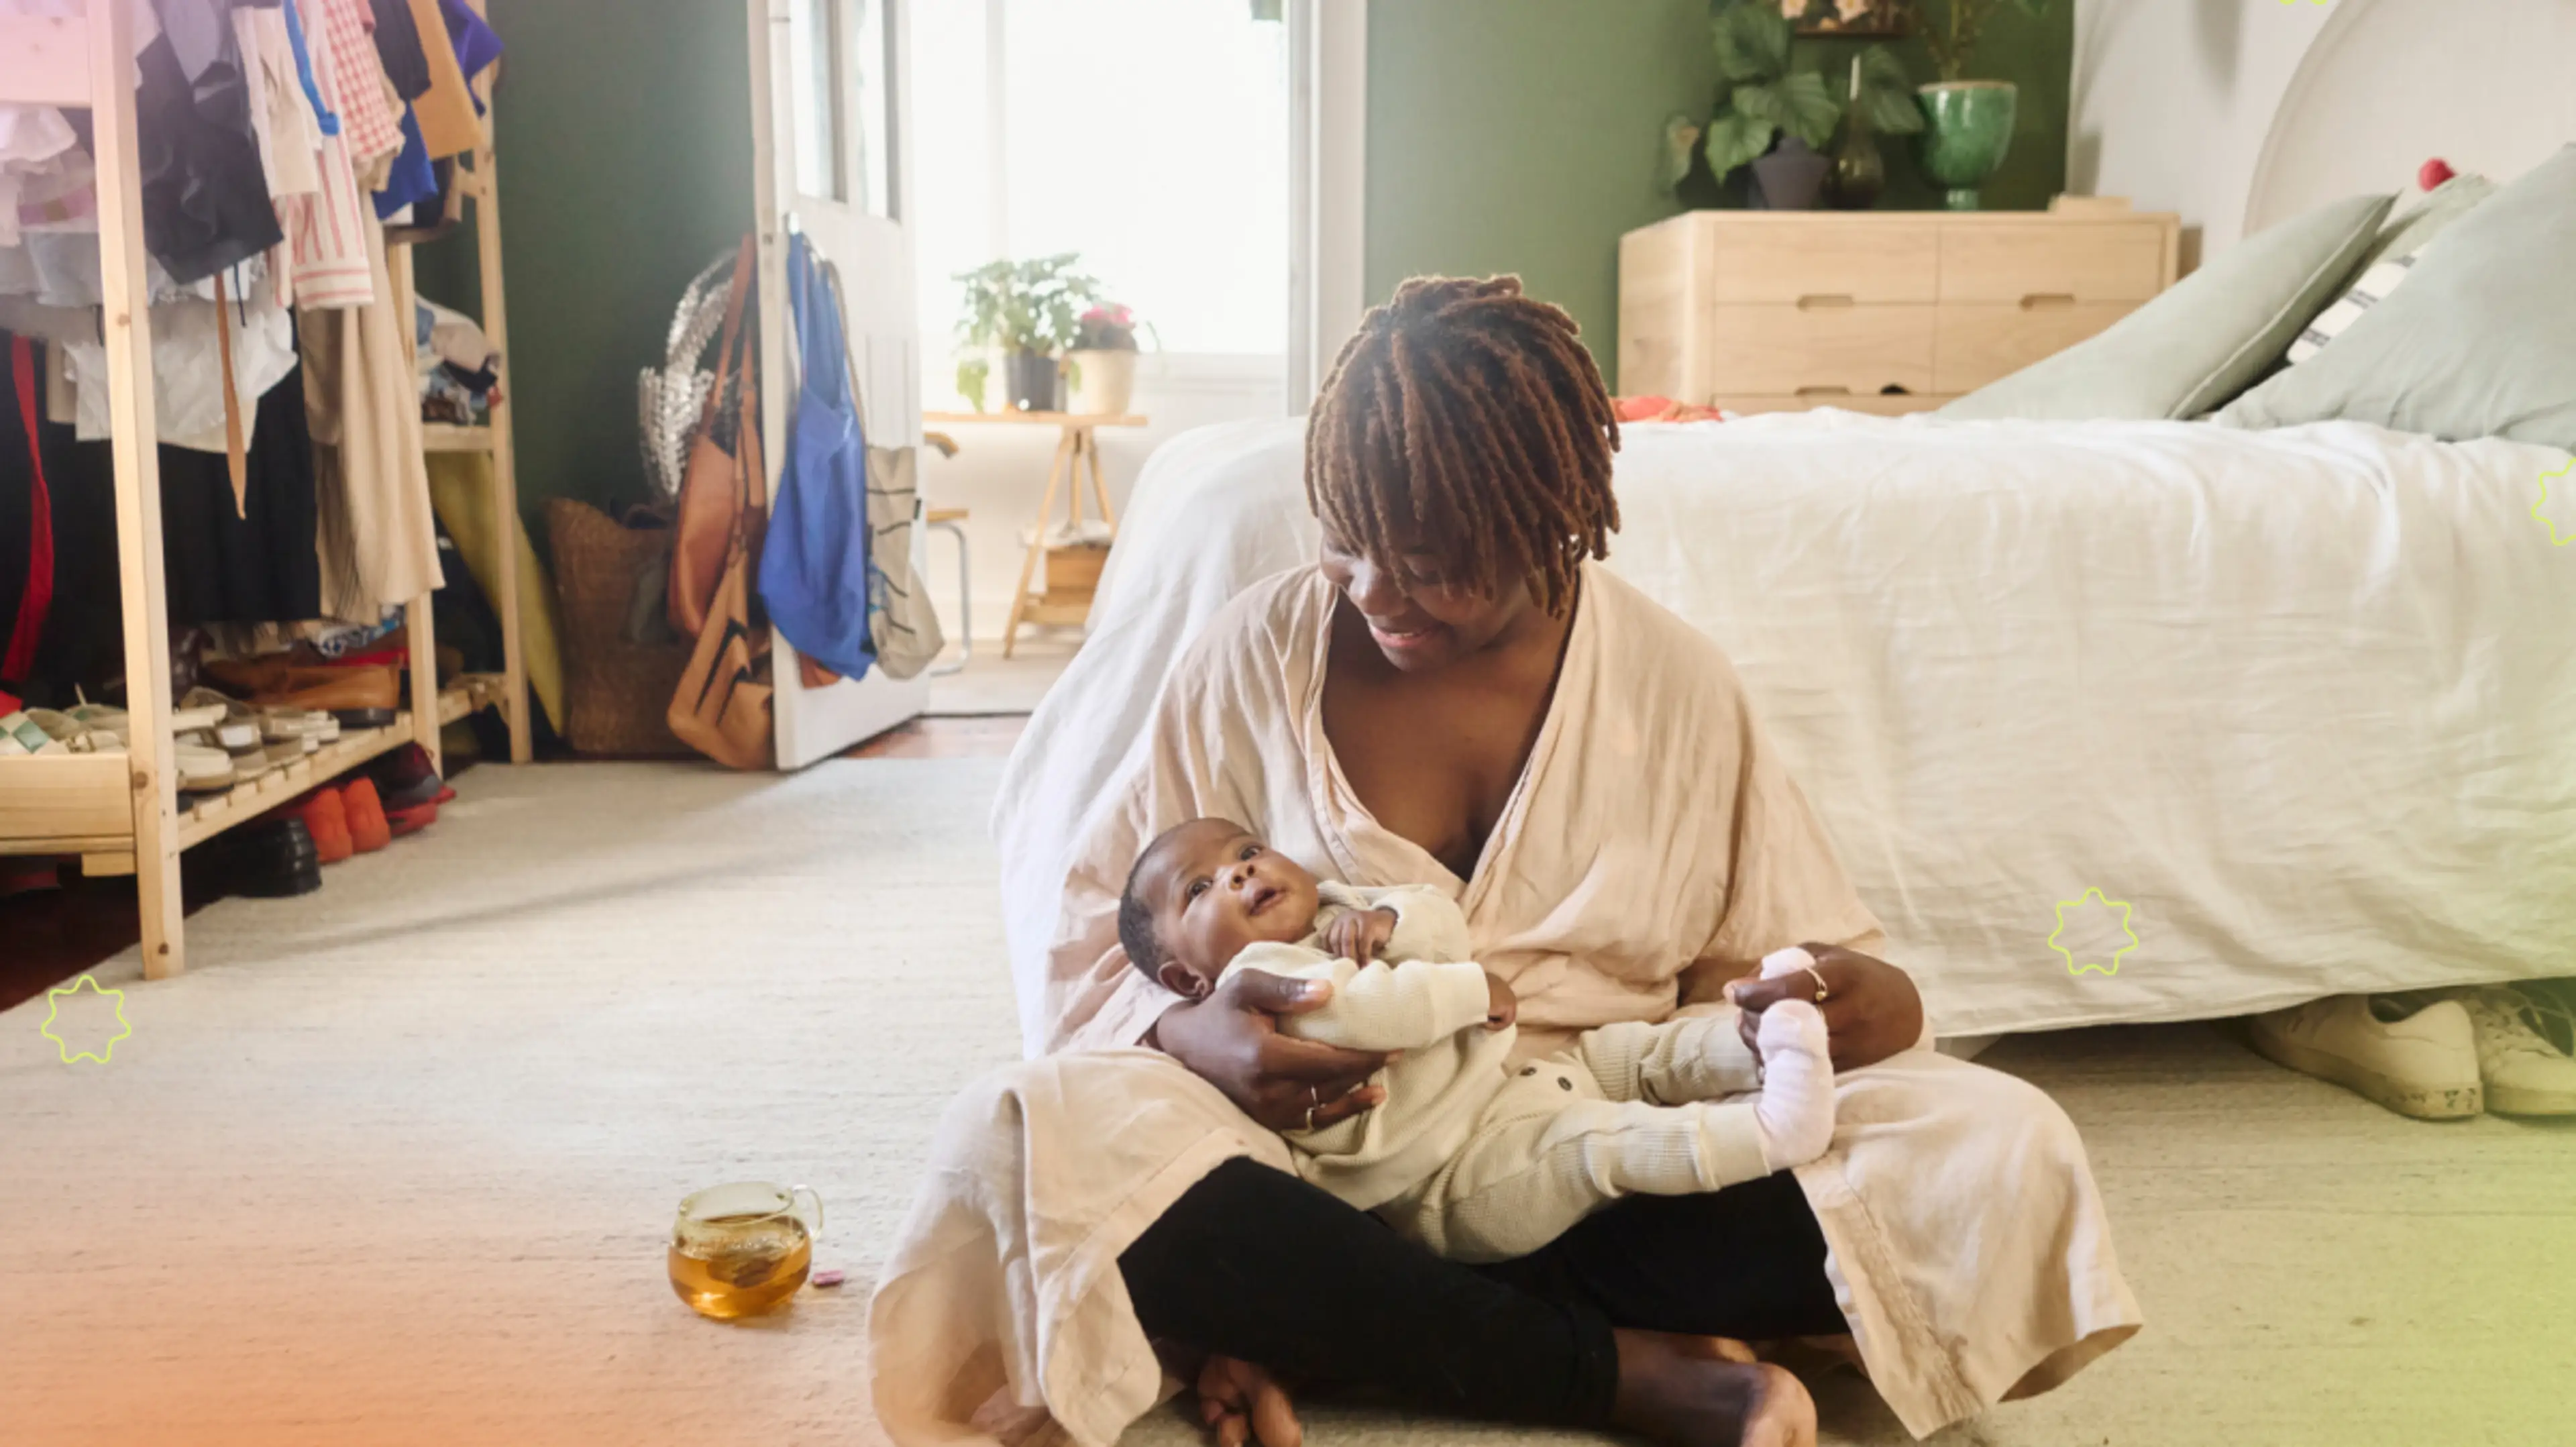 Image for article Does Motherhood Change You? It’s Complicated, According to These Women